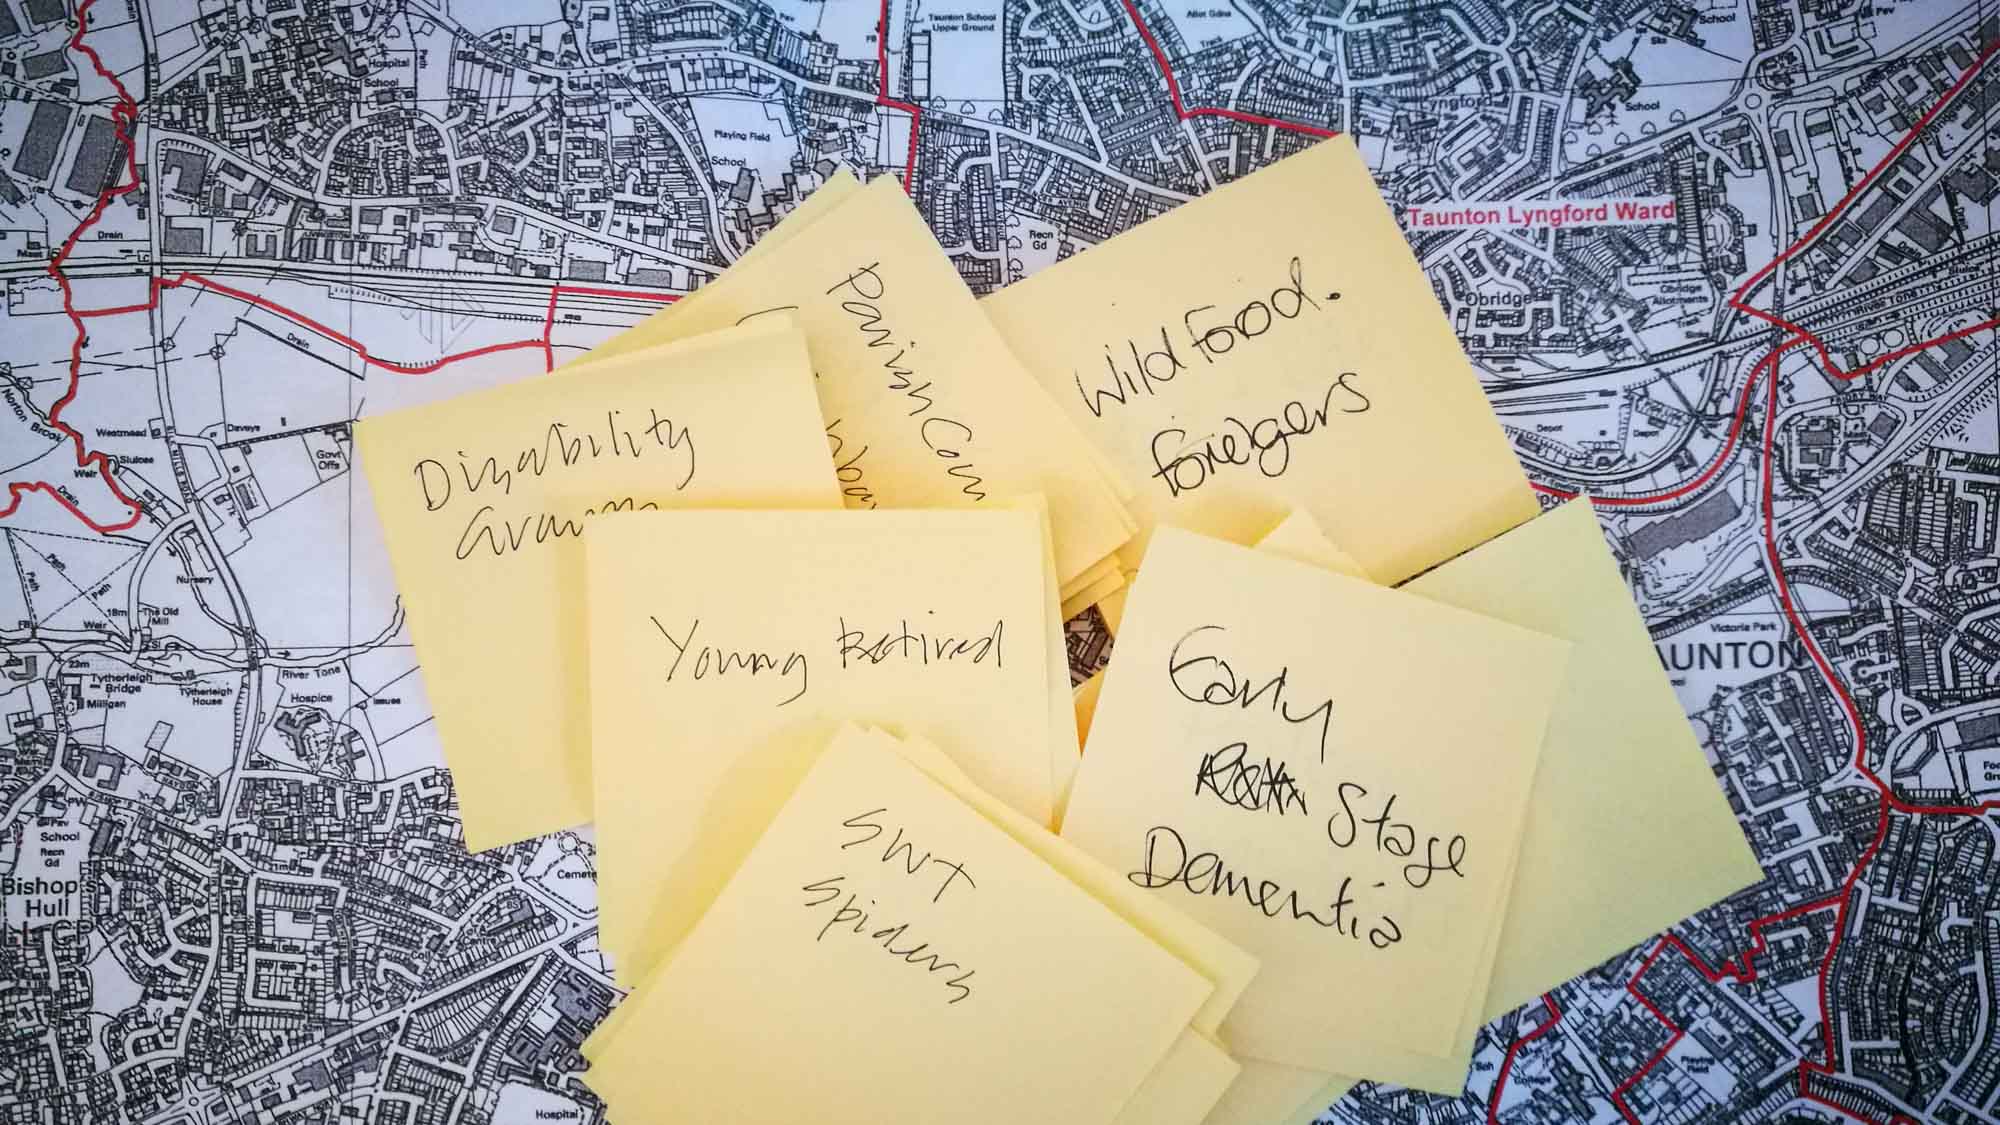 map and post-it notes Mapping ideas for local groups in Taunton